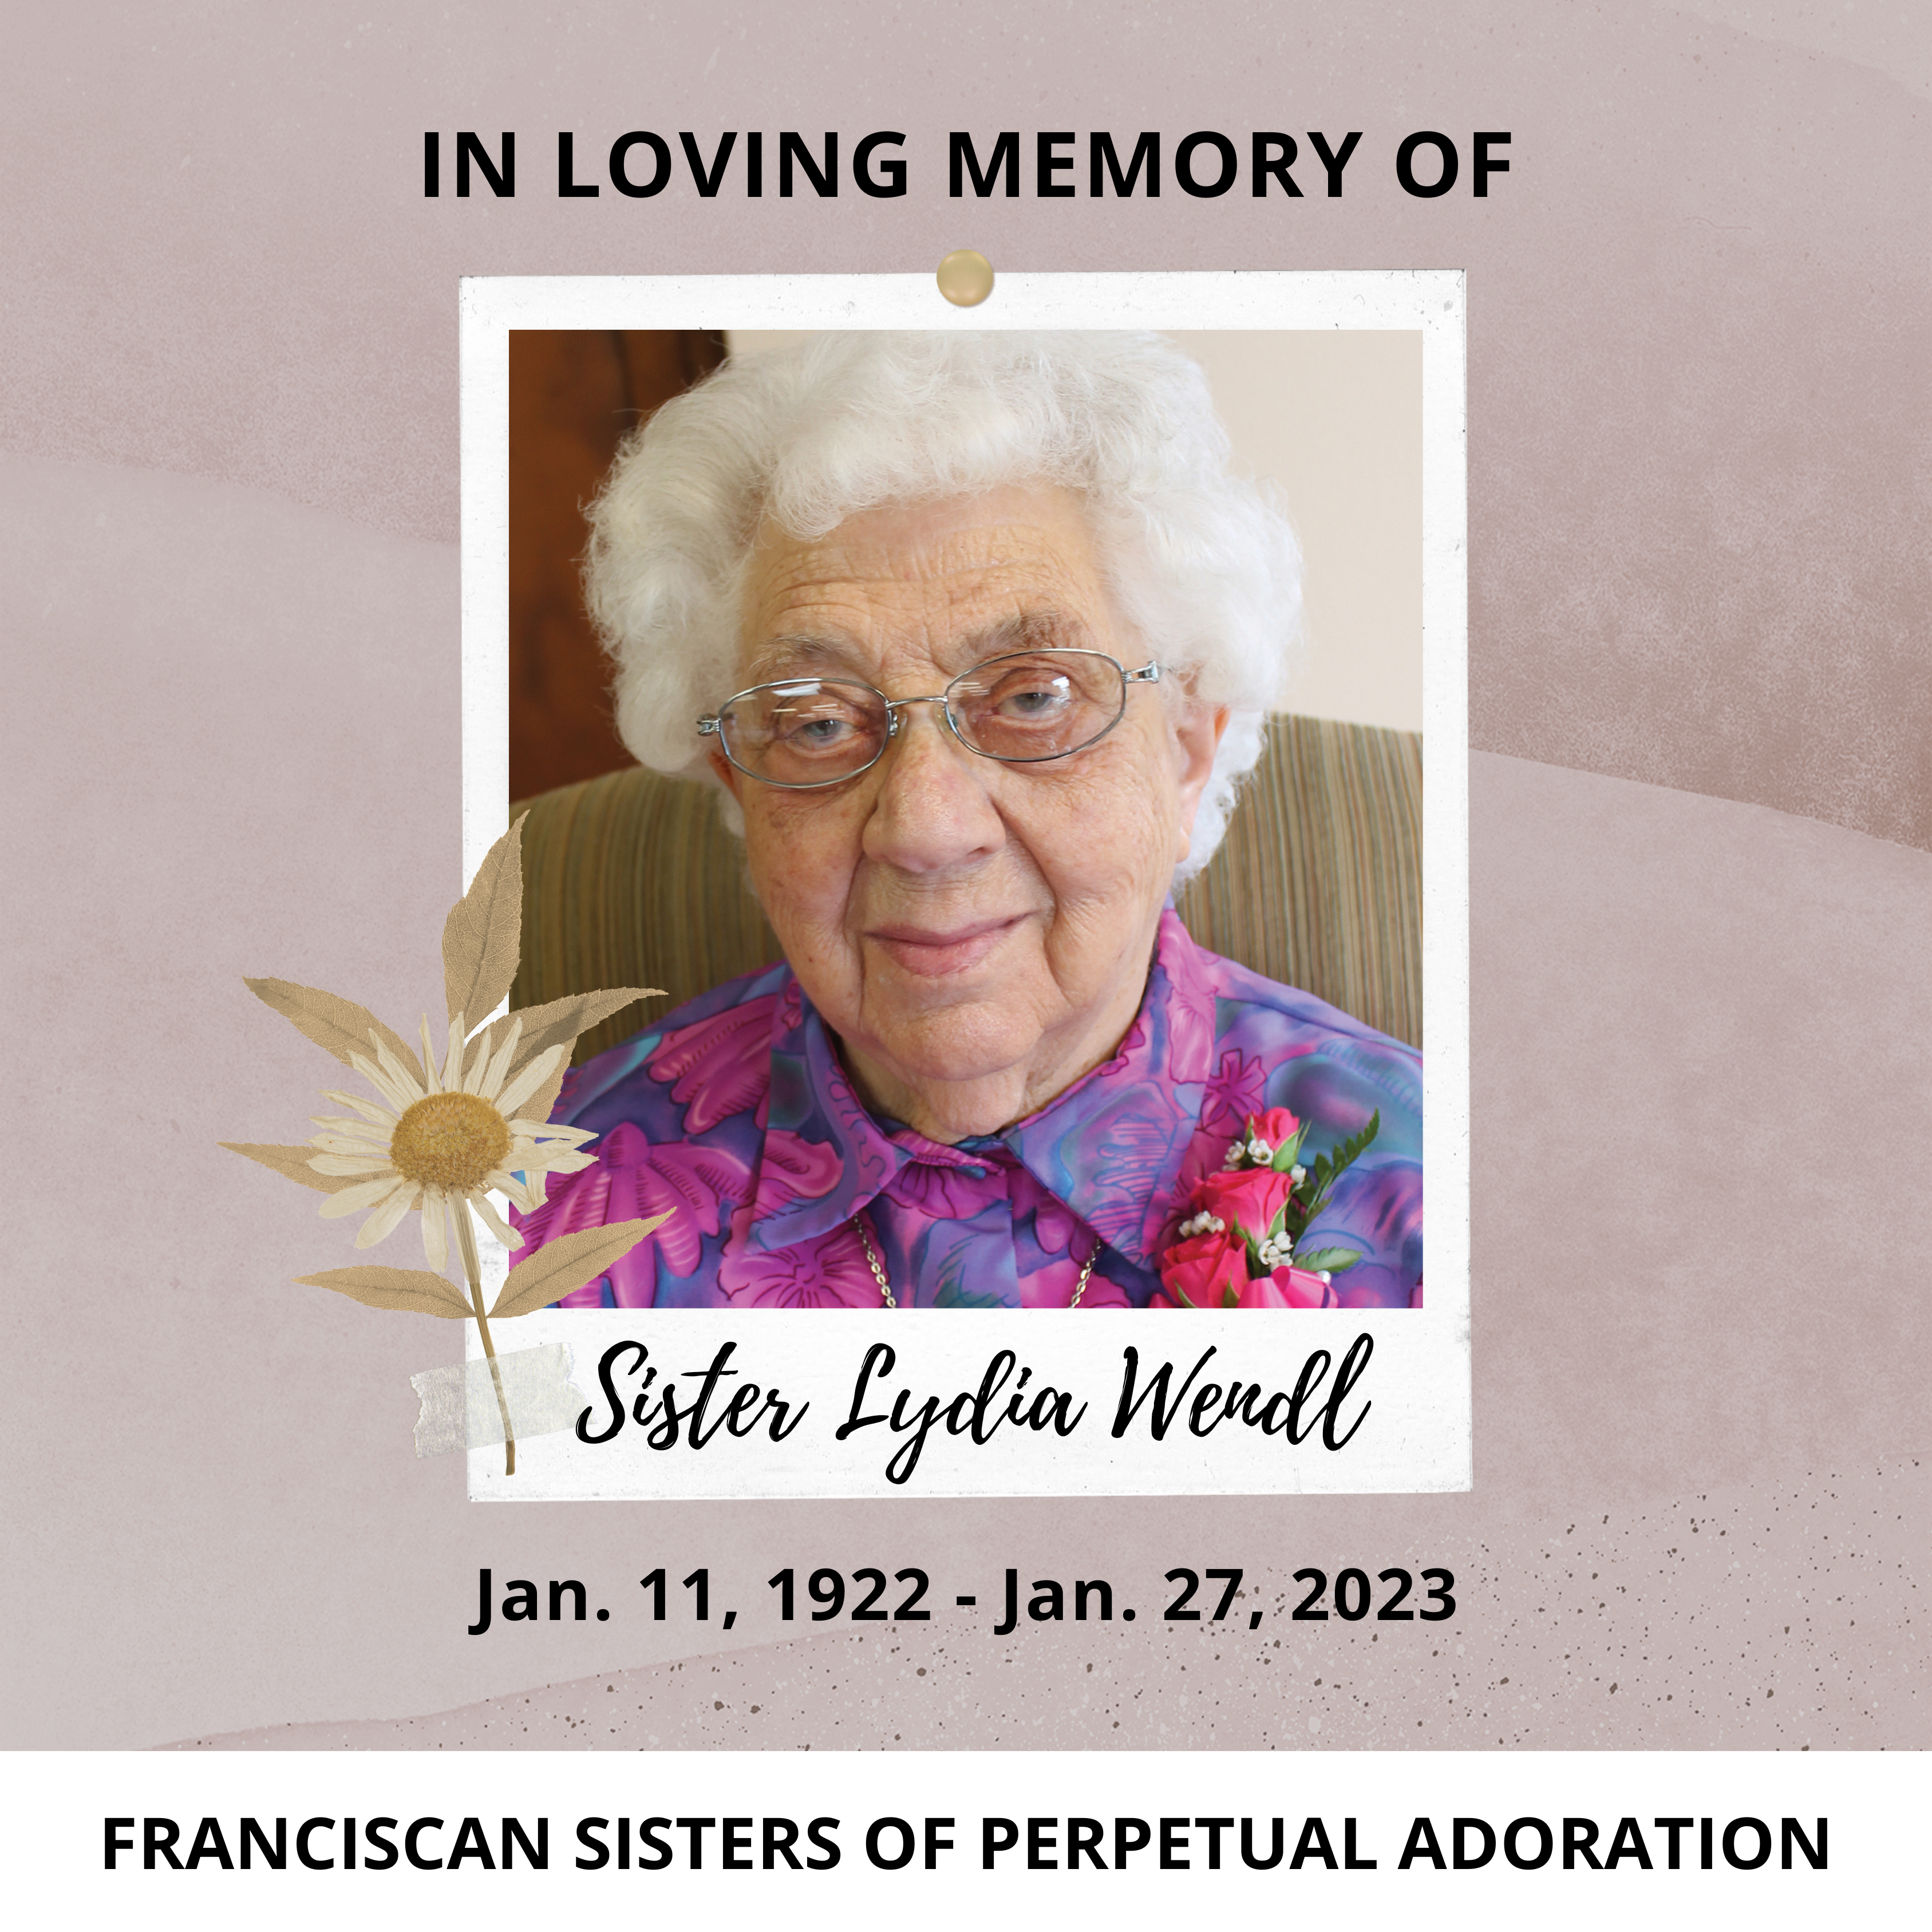 In Loving Memory Of Franciscan Sister of Perpetual Adoration Lydia Wendl